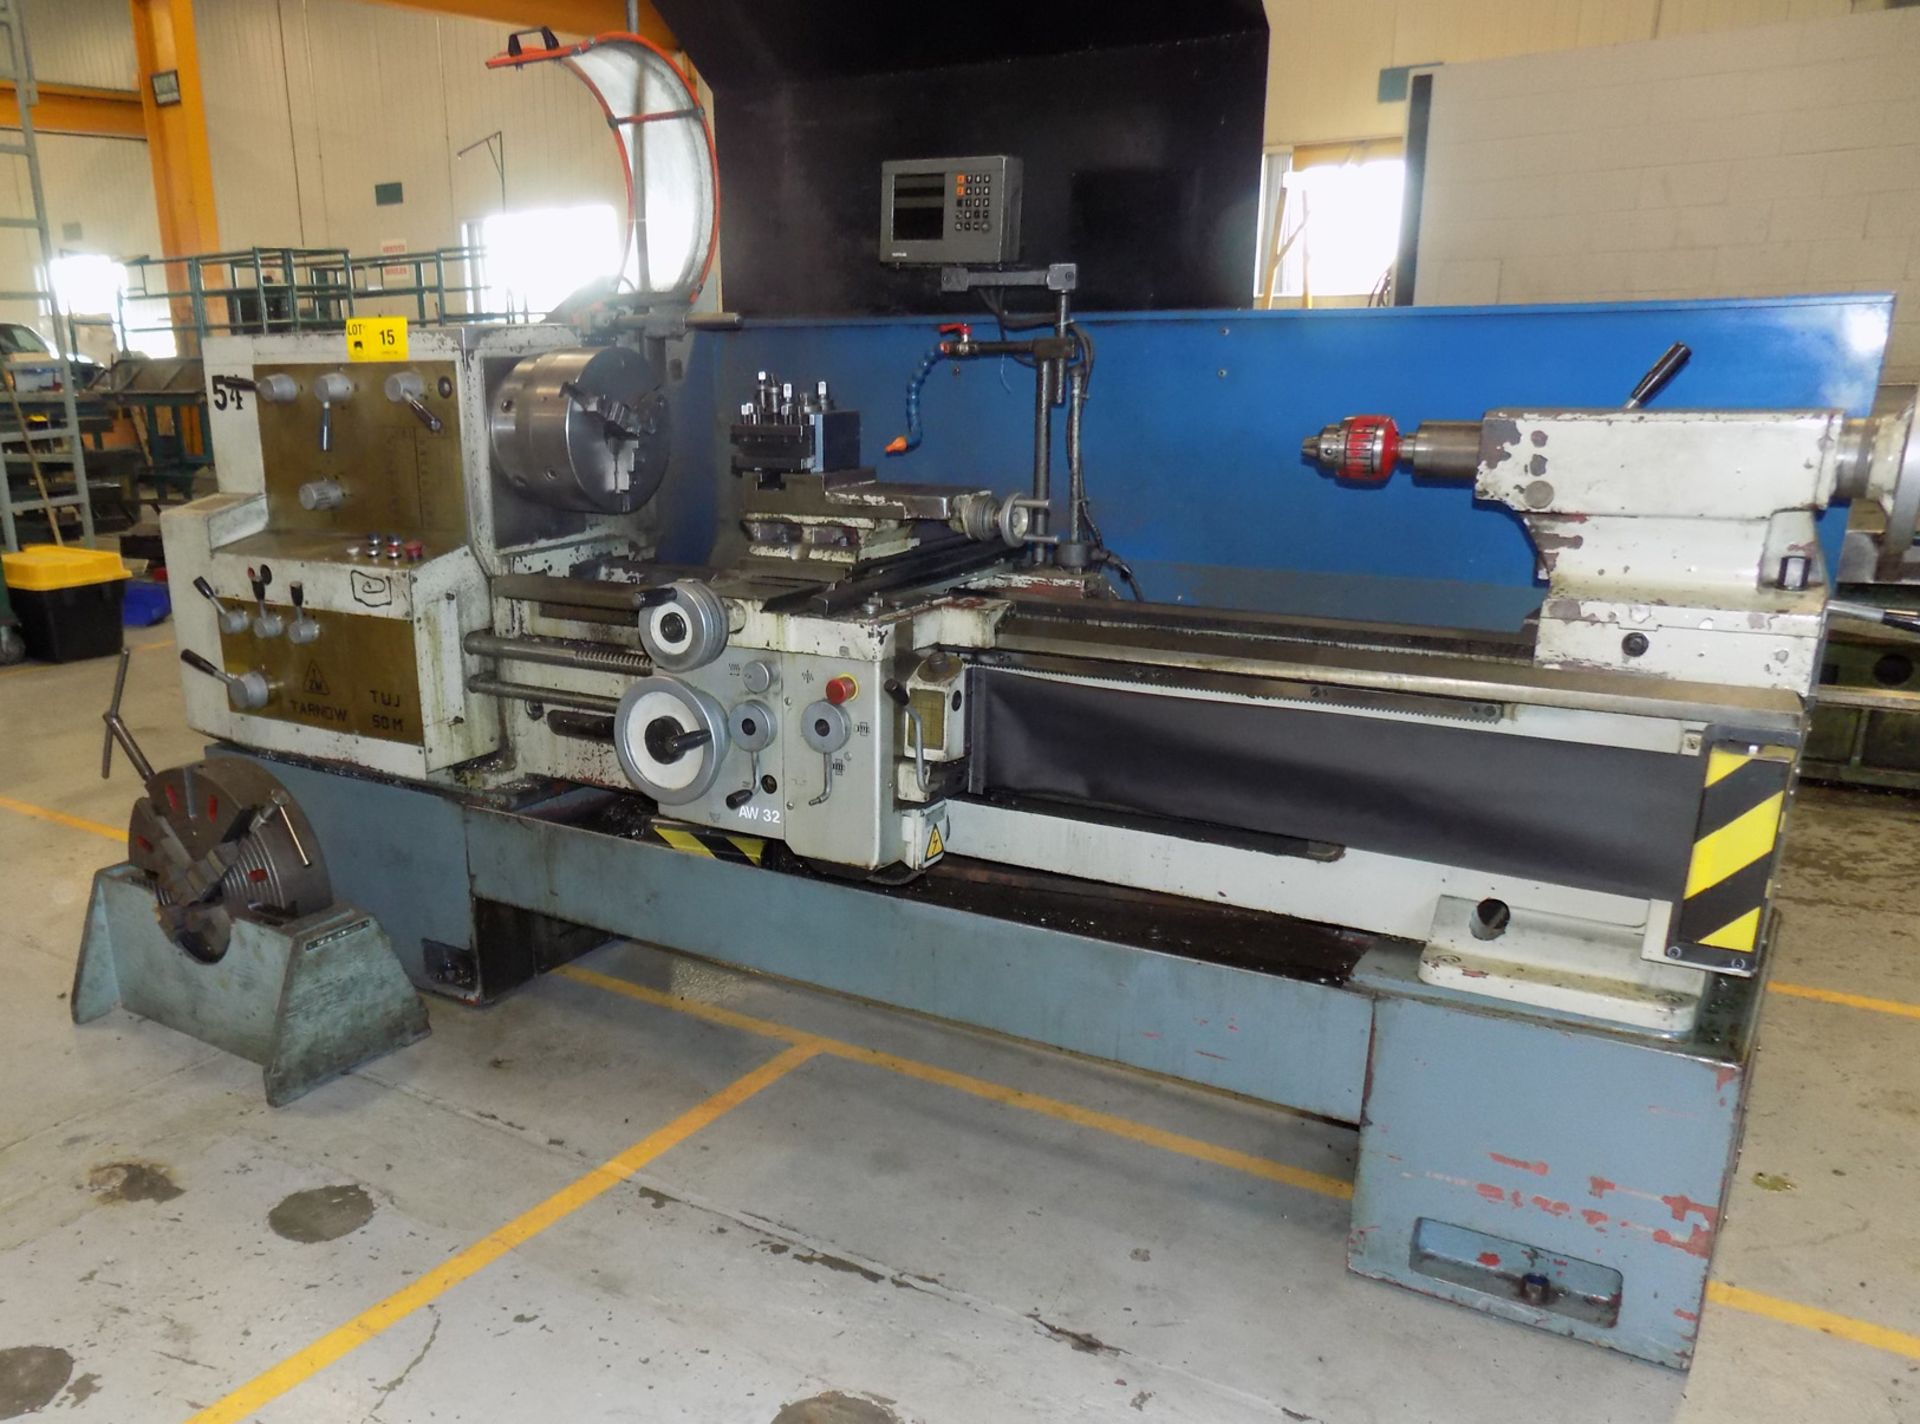 TARNOW TUJ 50M ENGINE LATHE WITH 20" SWING, 60" BETWEEN CENTERS, SPEEDS TO 1600 RPM, 10" 3-JAW - Image 3 of 7